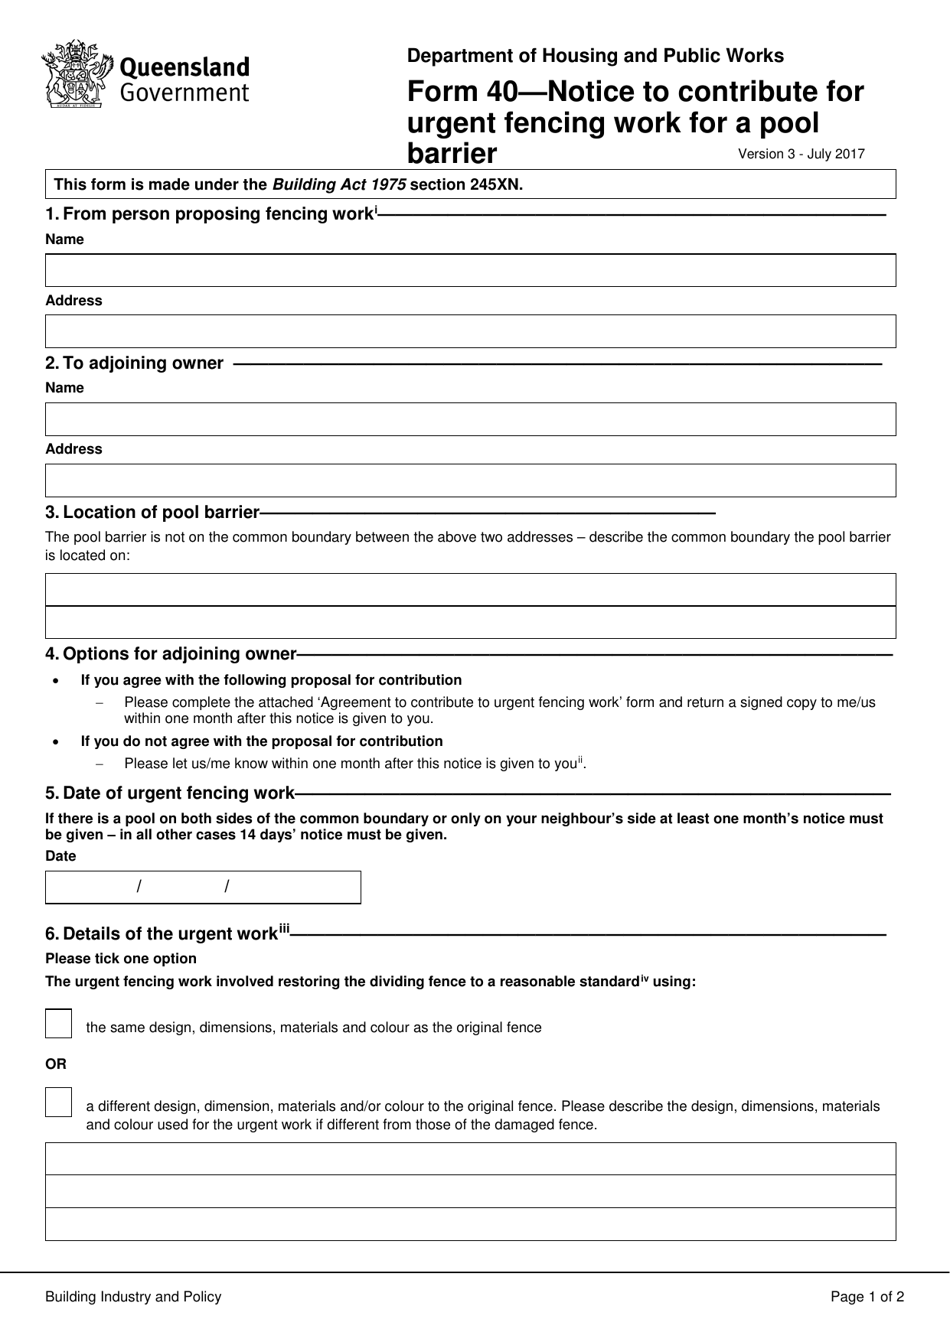 Form 40 Notice to Contribute for Urgent Fencing Work for a Pool Barrier - Queensland, Australia, Page 1